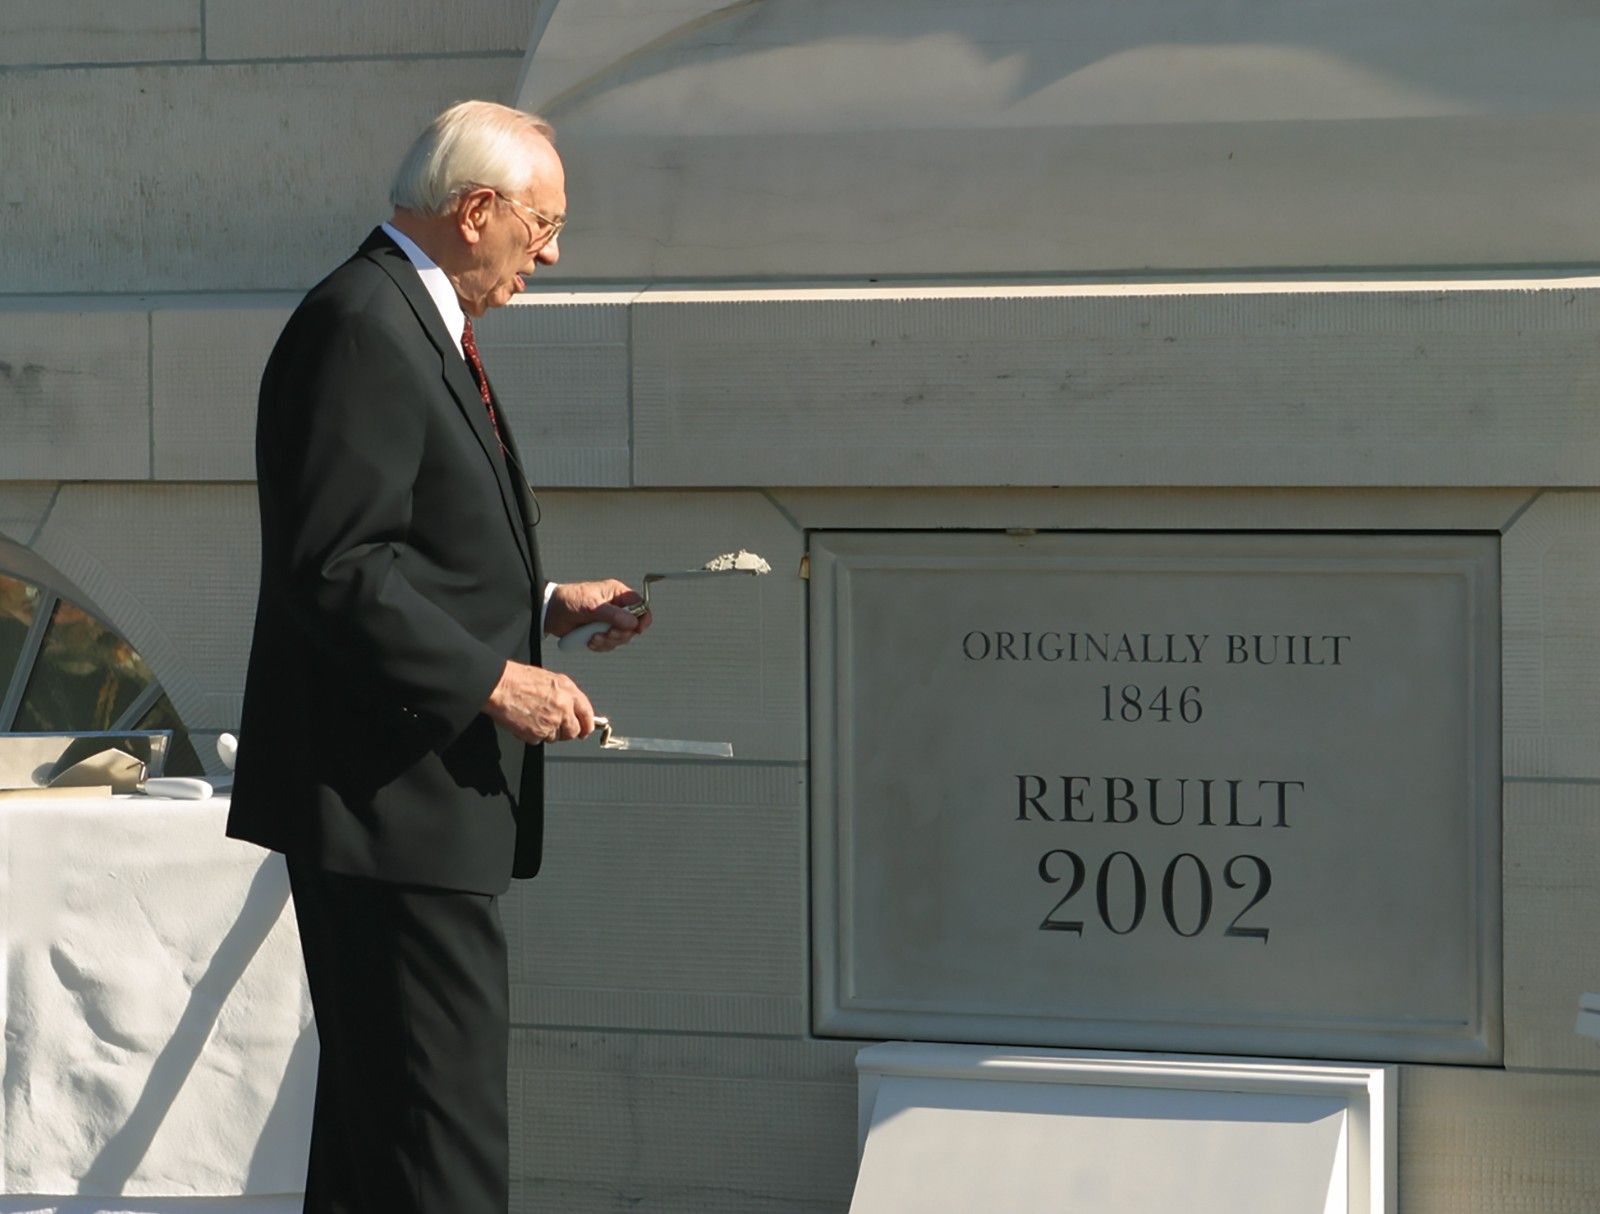 Gordon B. Hinckley applying mortar at the cornerstone ceremony during the dedication of the Nauvoo Illinois Temple.